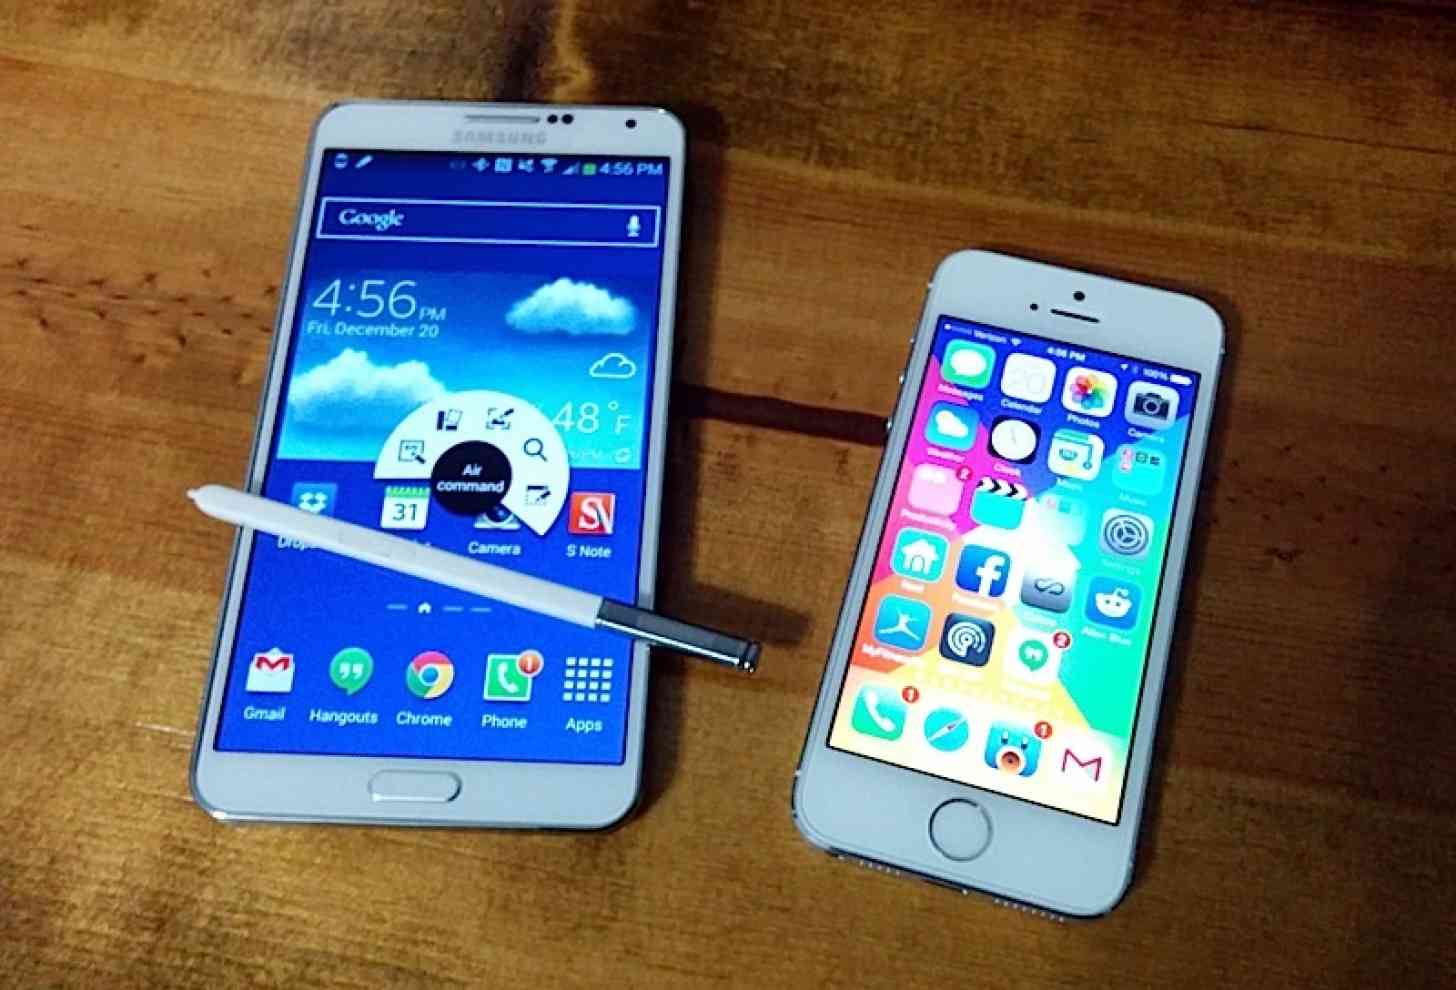 Galaxy Note 4 iPhone 5s